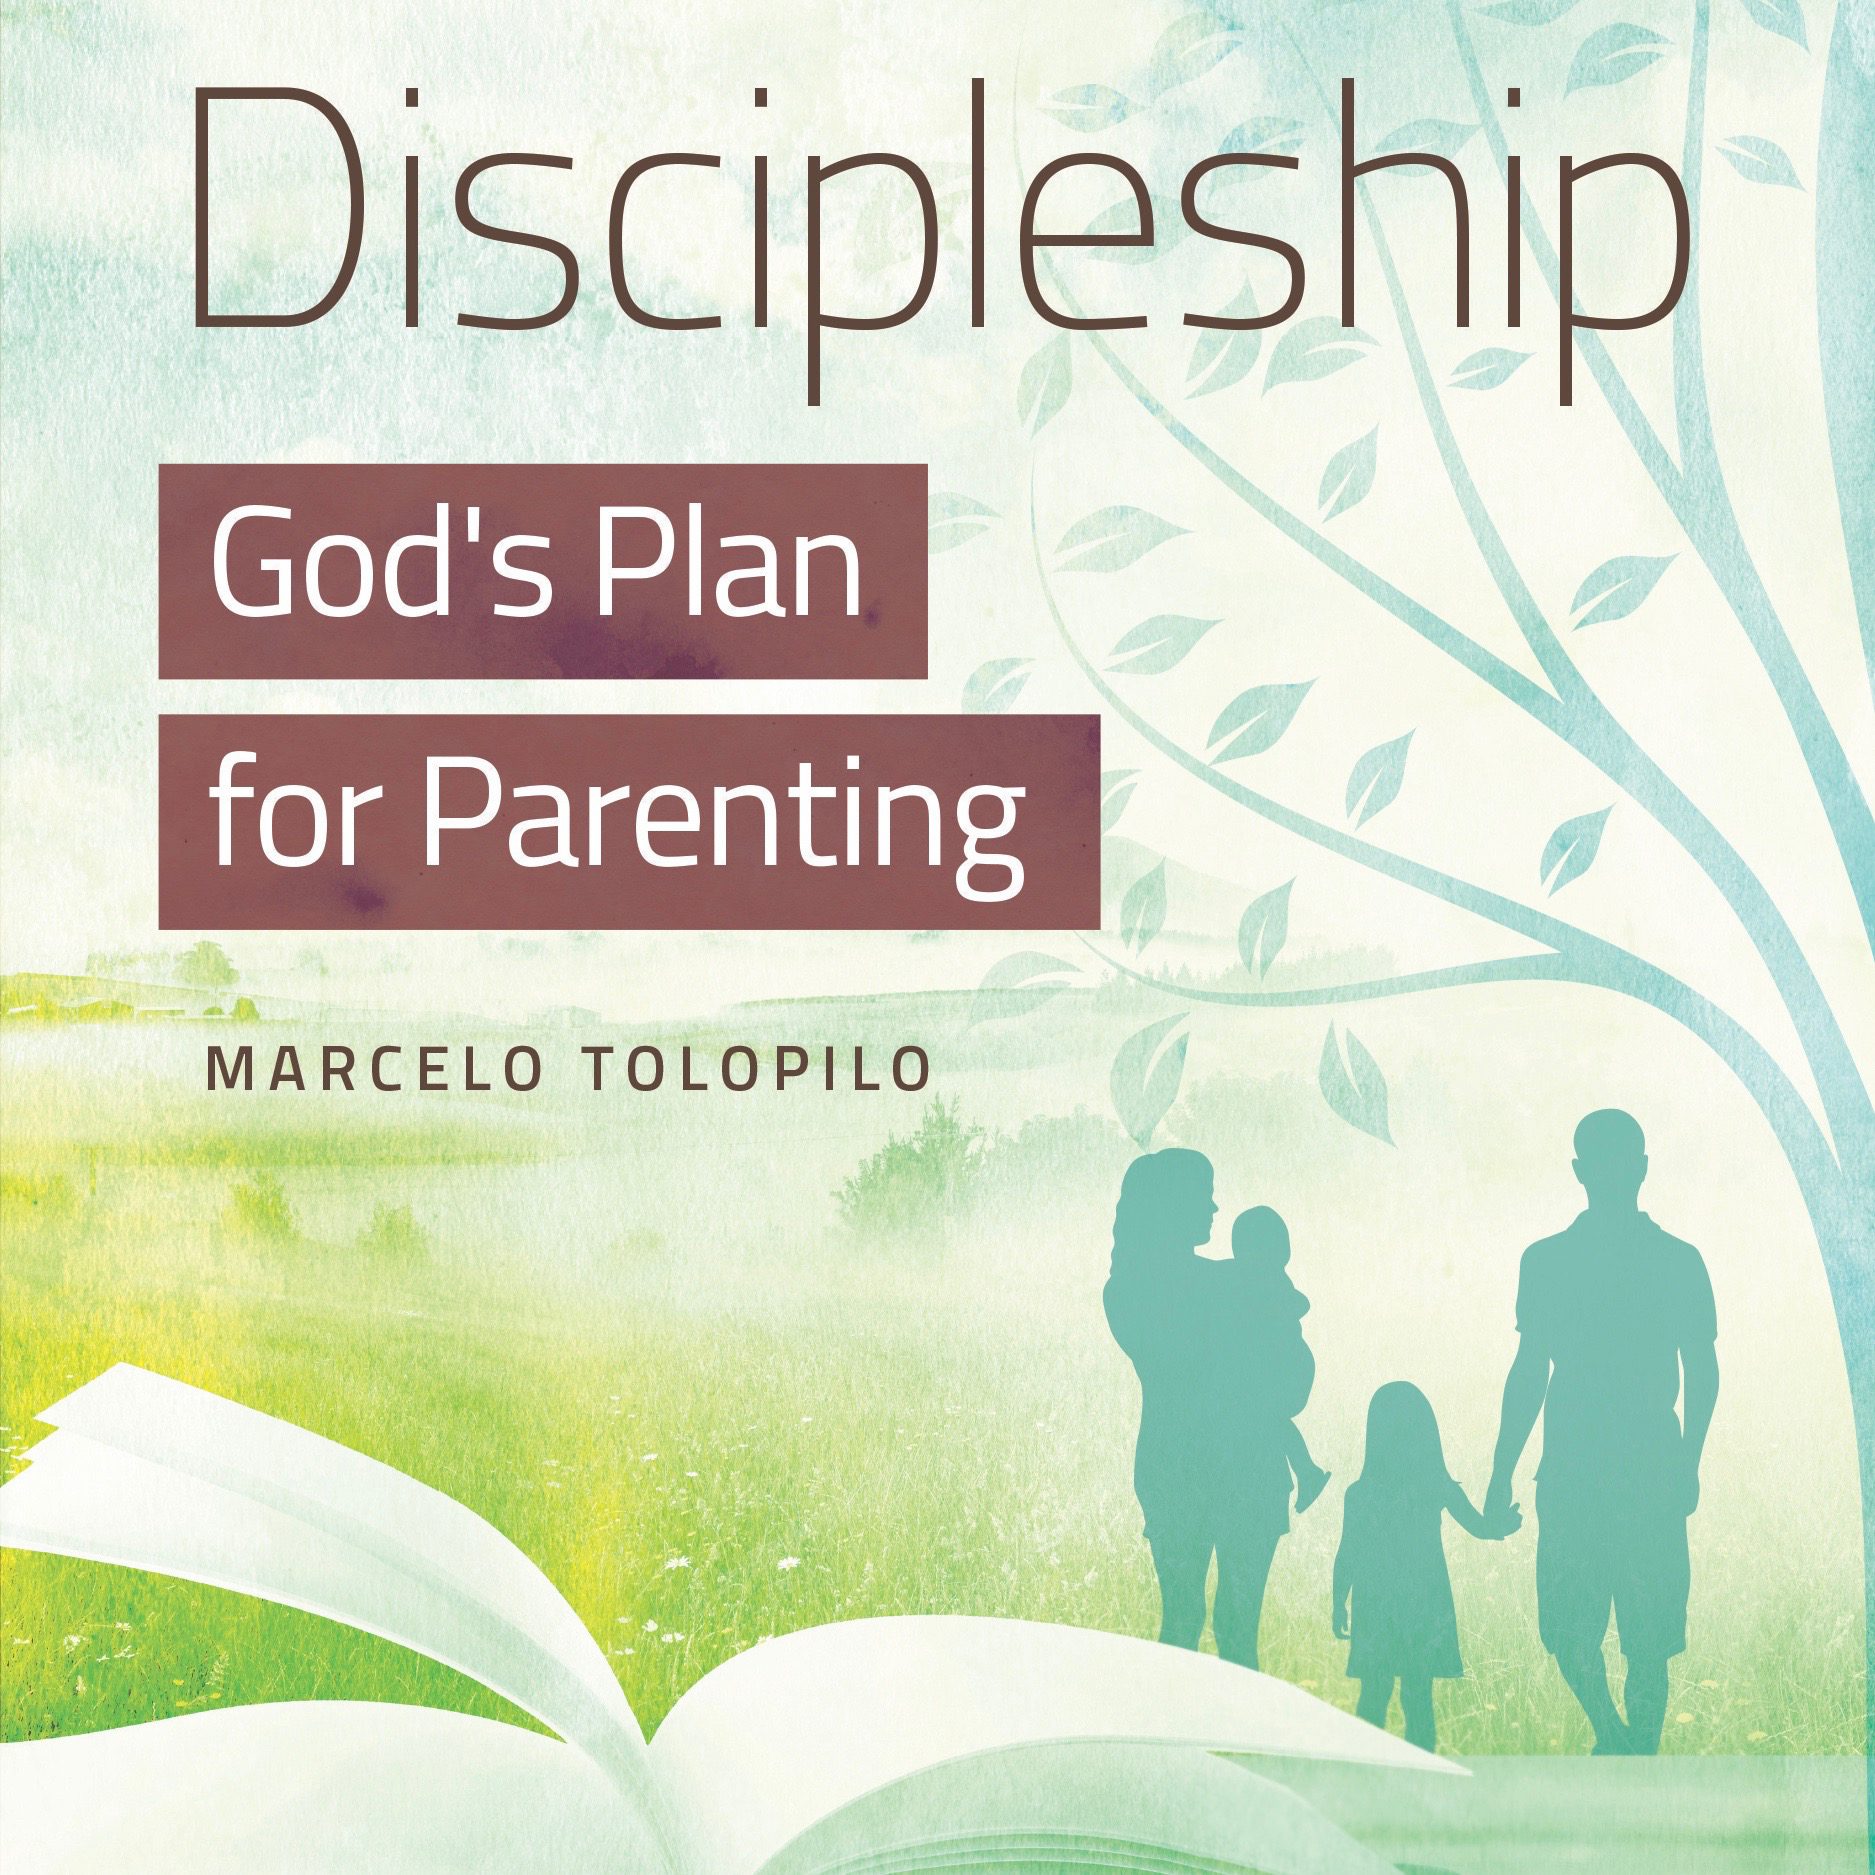 Featured image for “Discipleship, God’s Plan for Parenting”